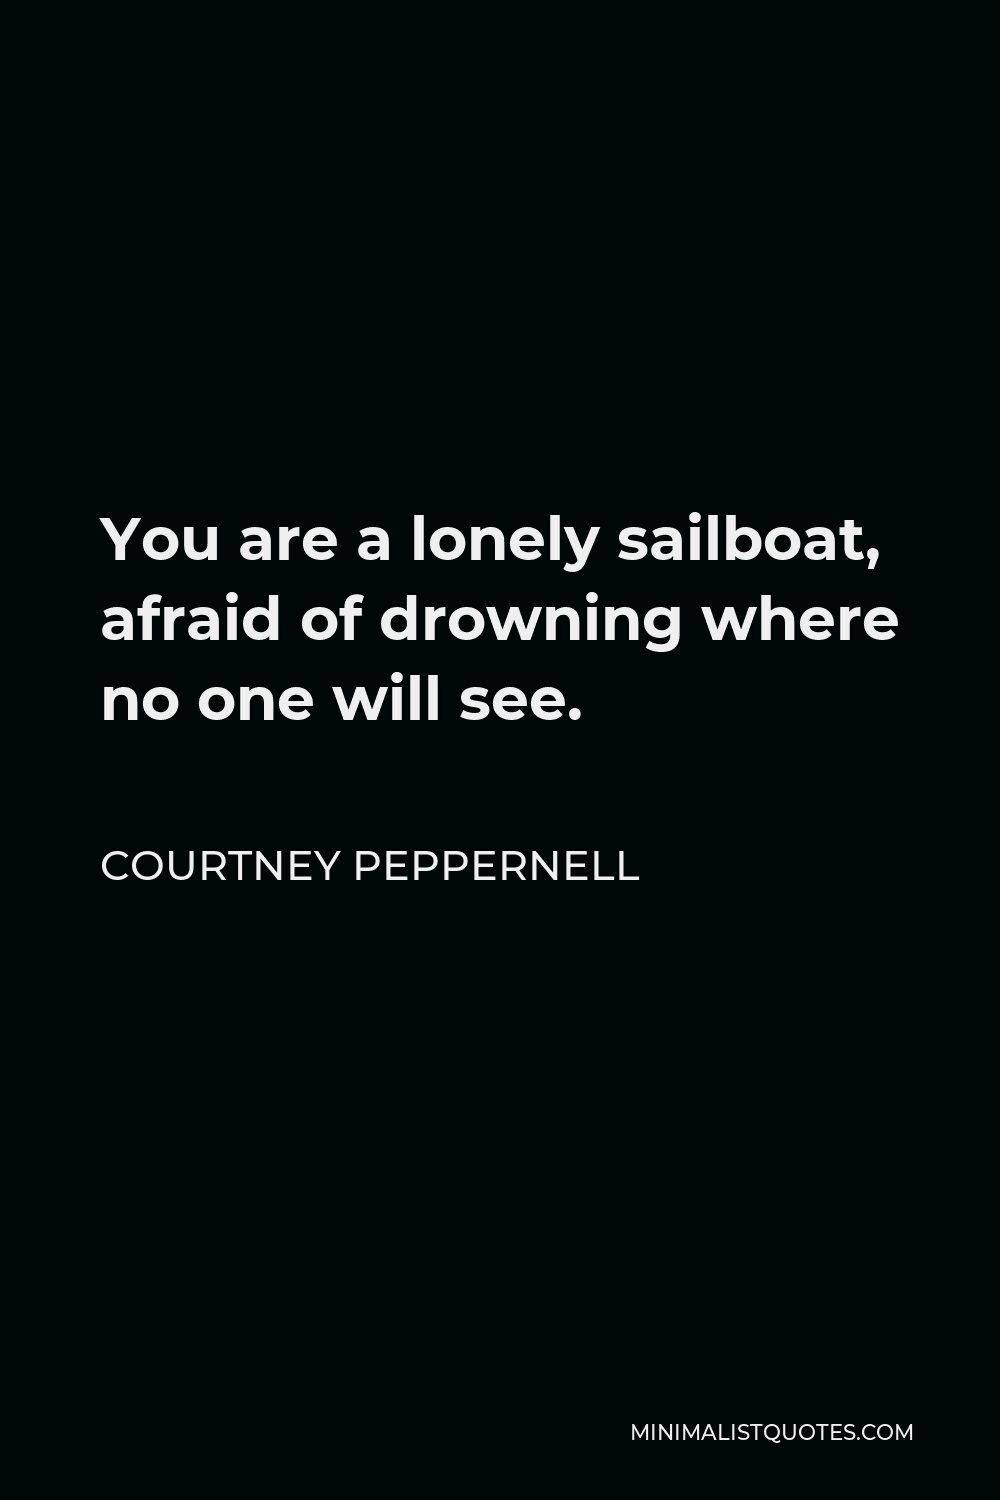 Courtney Peppernell Quote - You are a lonely sailboat, afraid of drowning where no one will see.